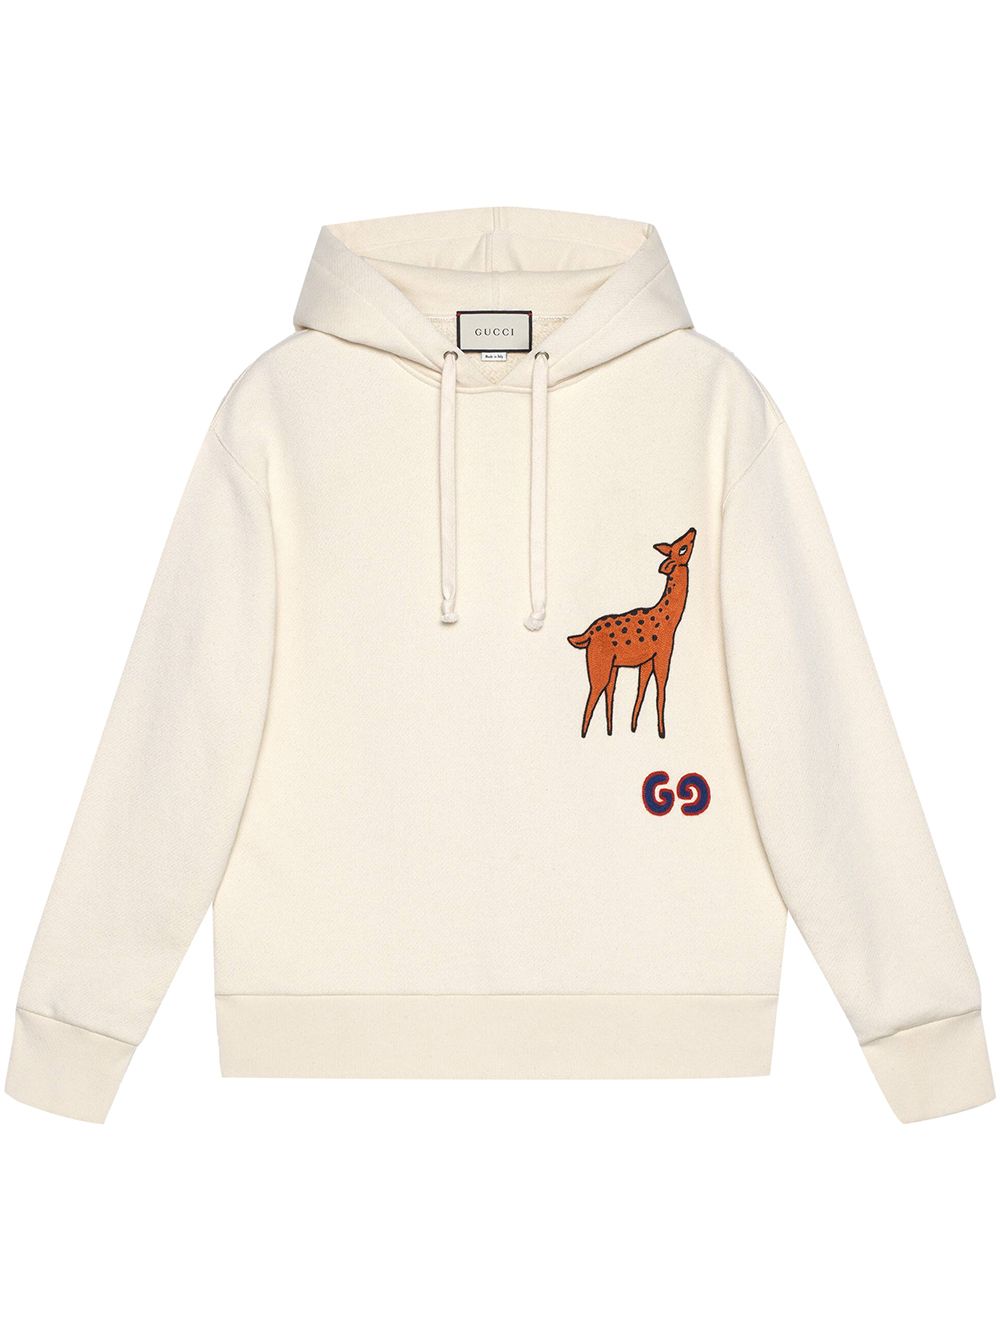 Gucci Patch Detail Hoodie Aw19 